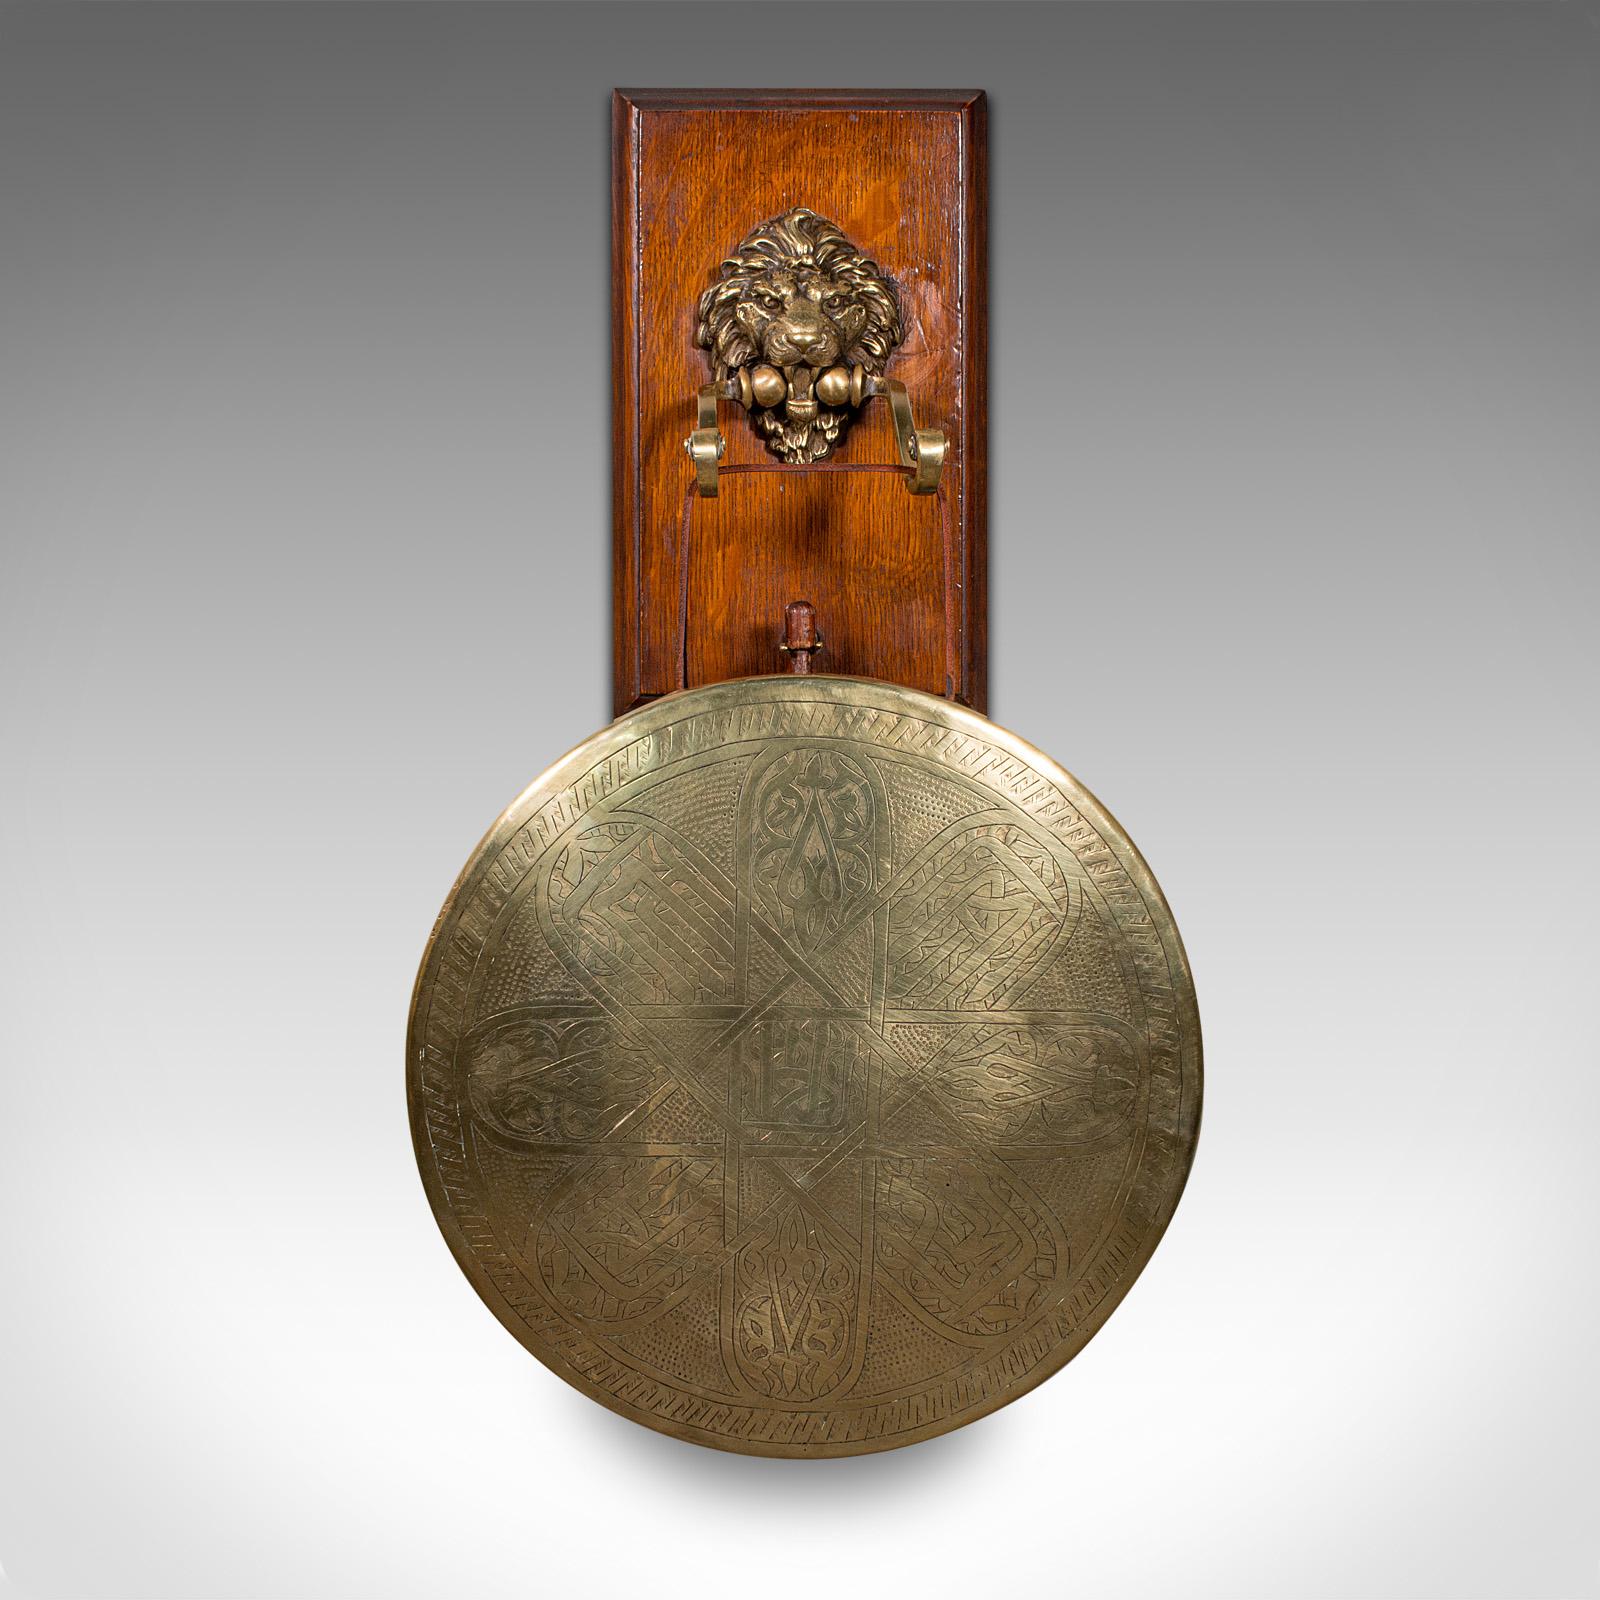 This is an antique hanging dinner gong. An English, brass and oak decorative mount, dating to the late Victorian period, circa 1880.

Of wonderful form and superb craftsmanship
Displays a desirable aged patina and in good order
Oak back rest